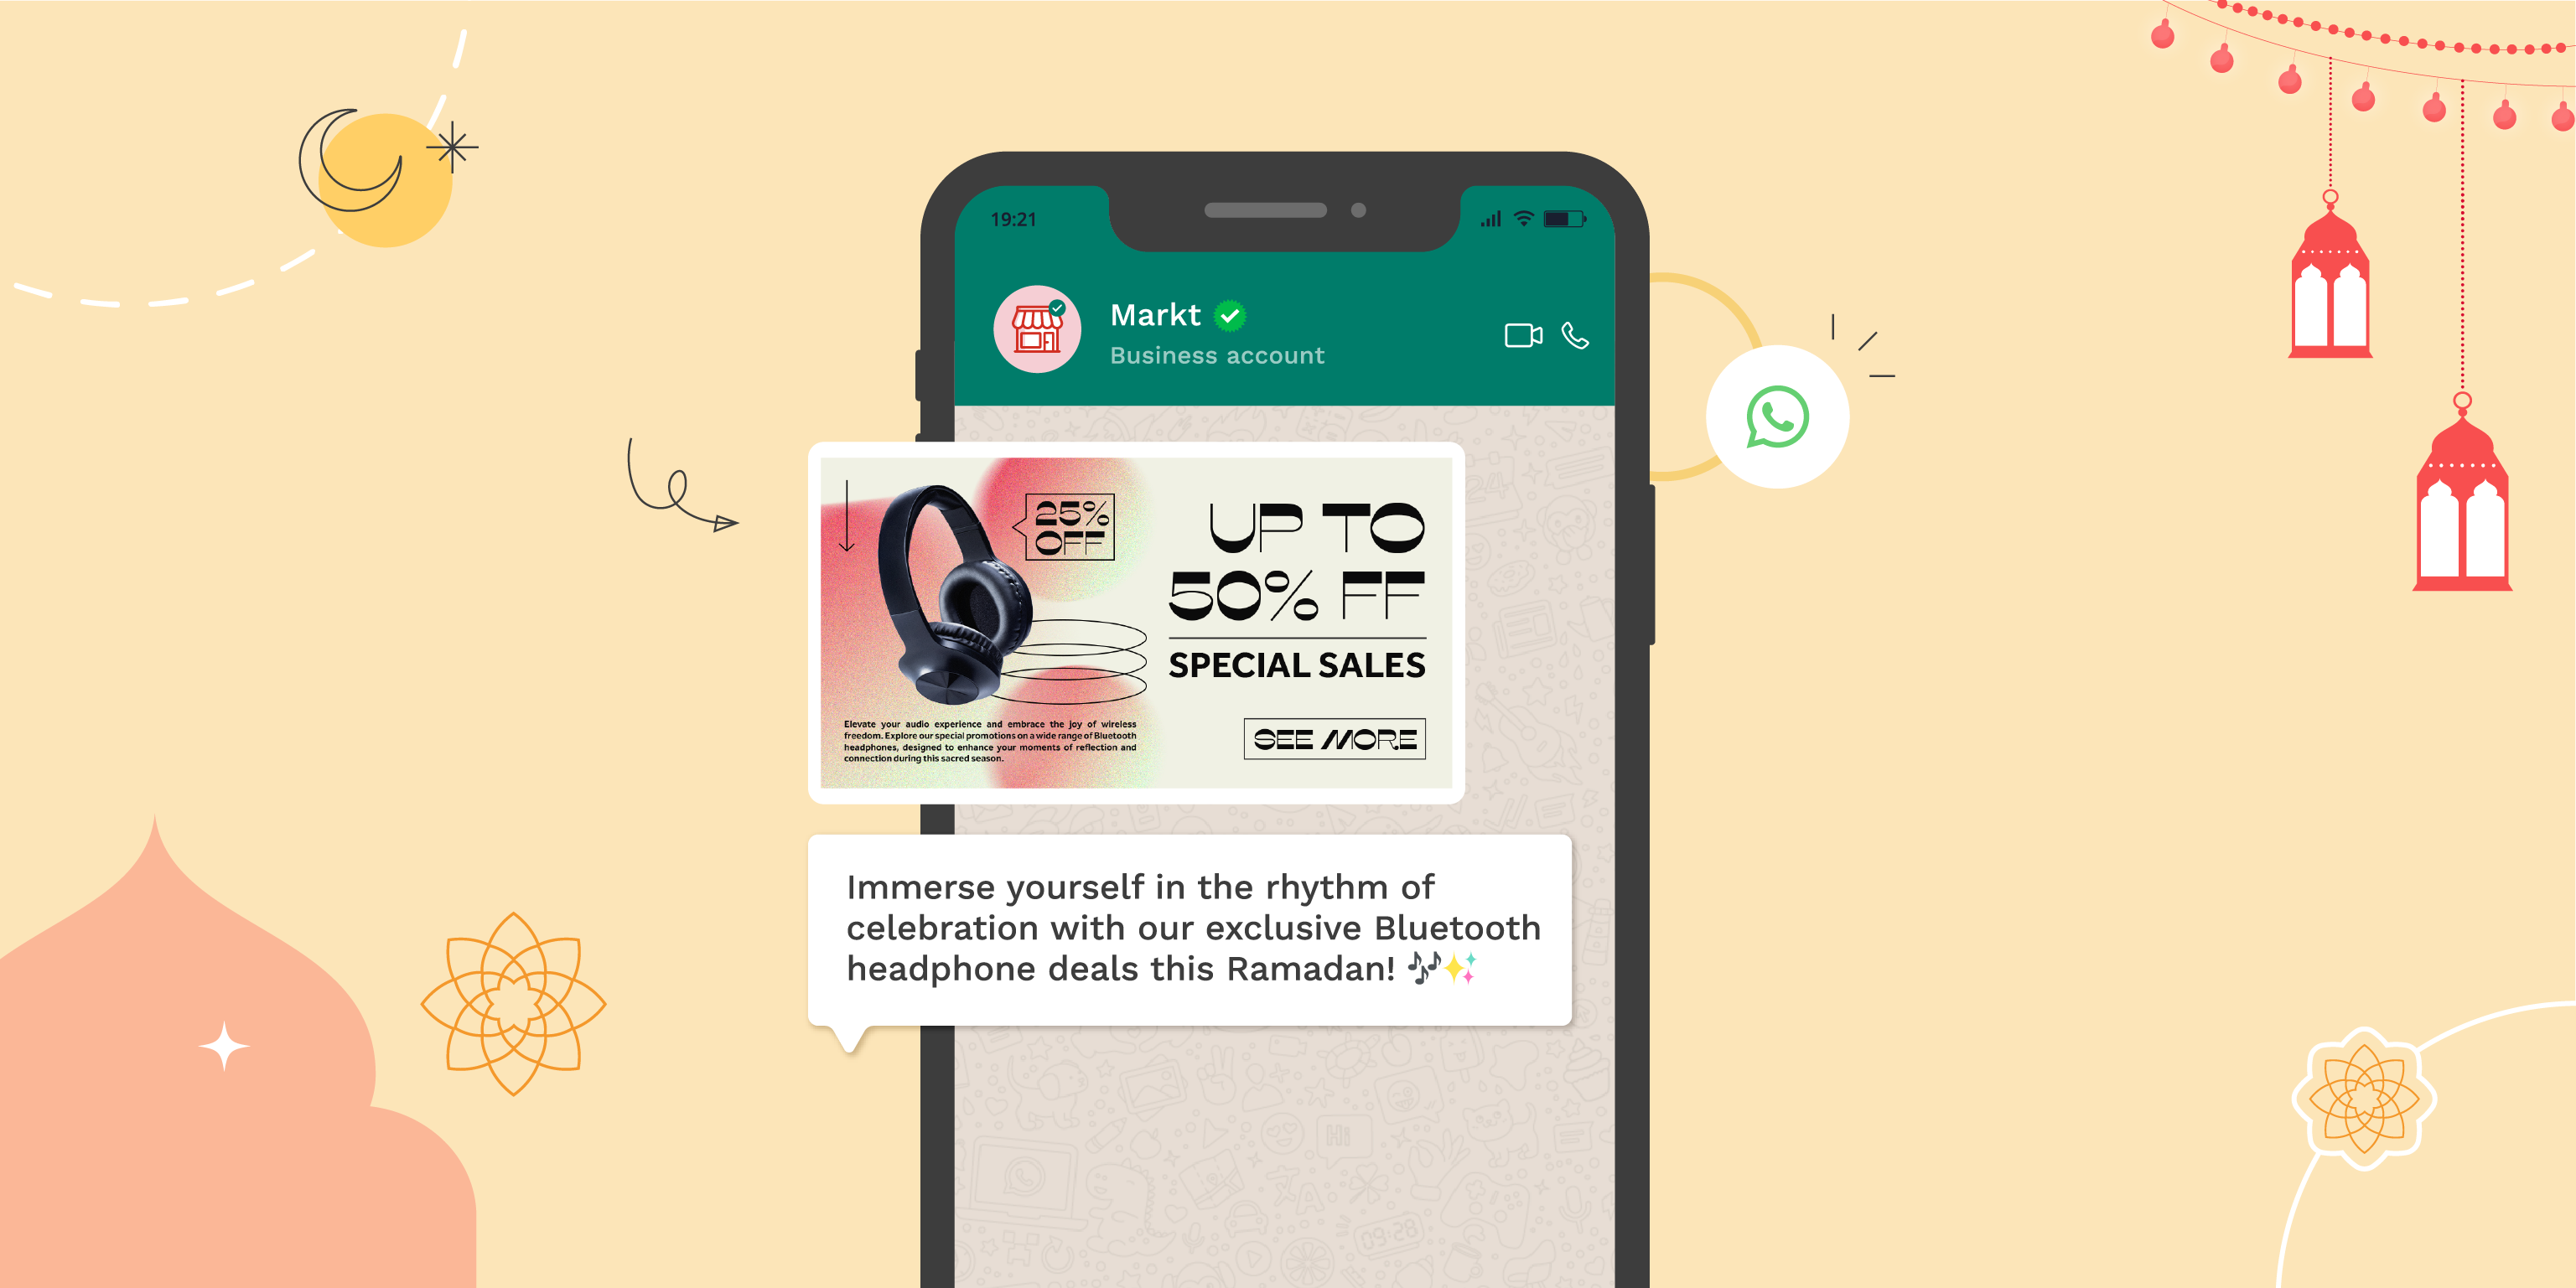 Eid marketing campaigns with whatsapp